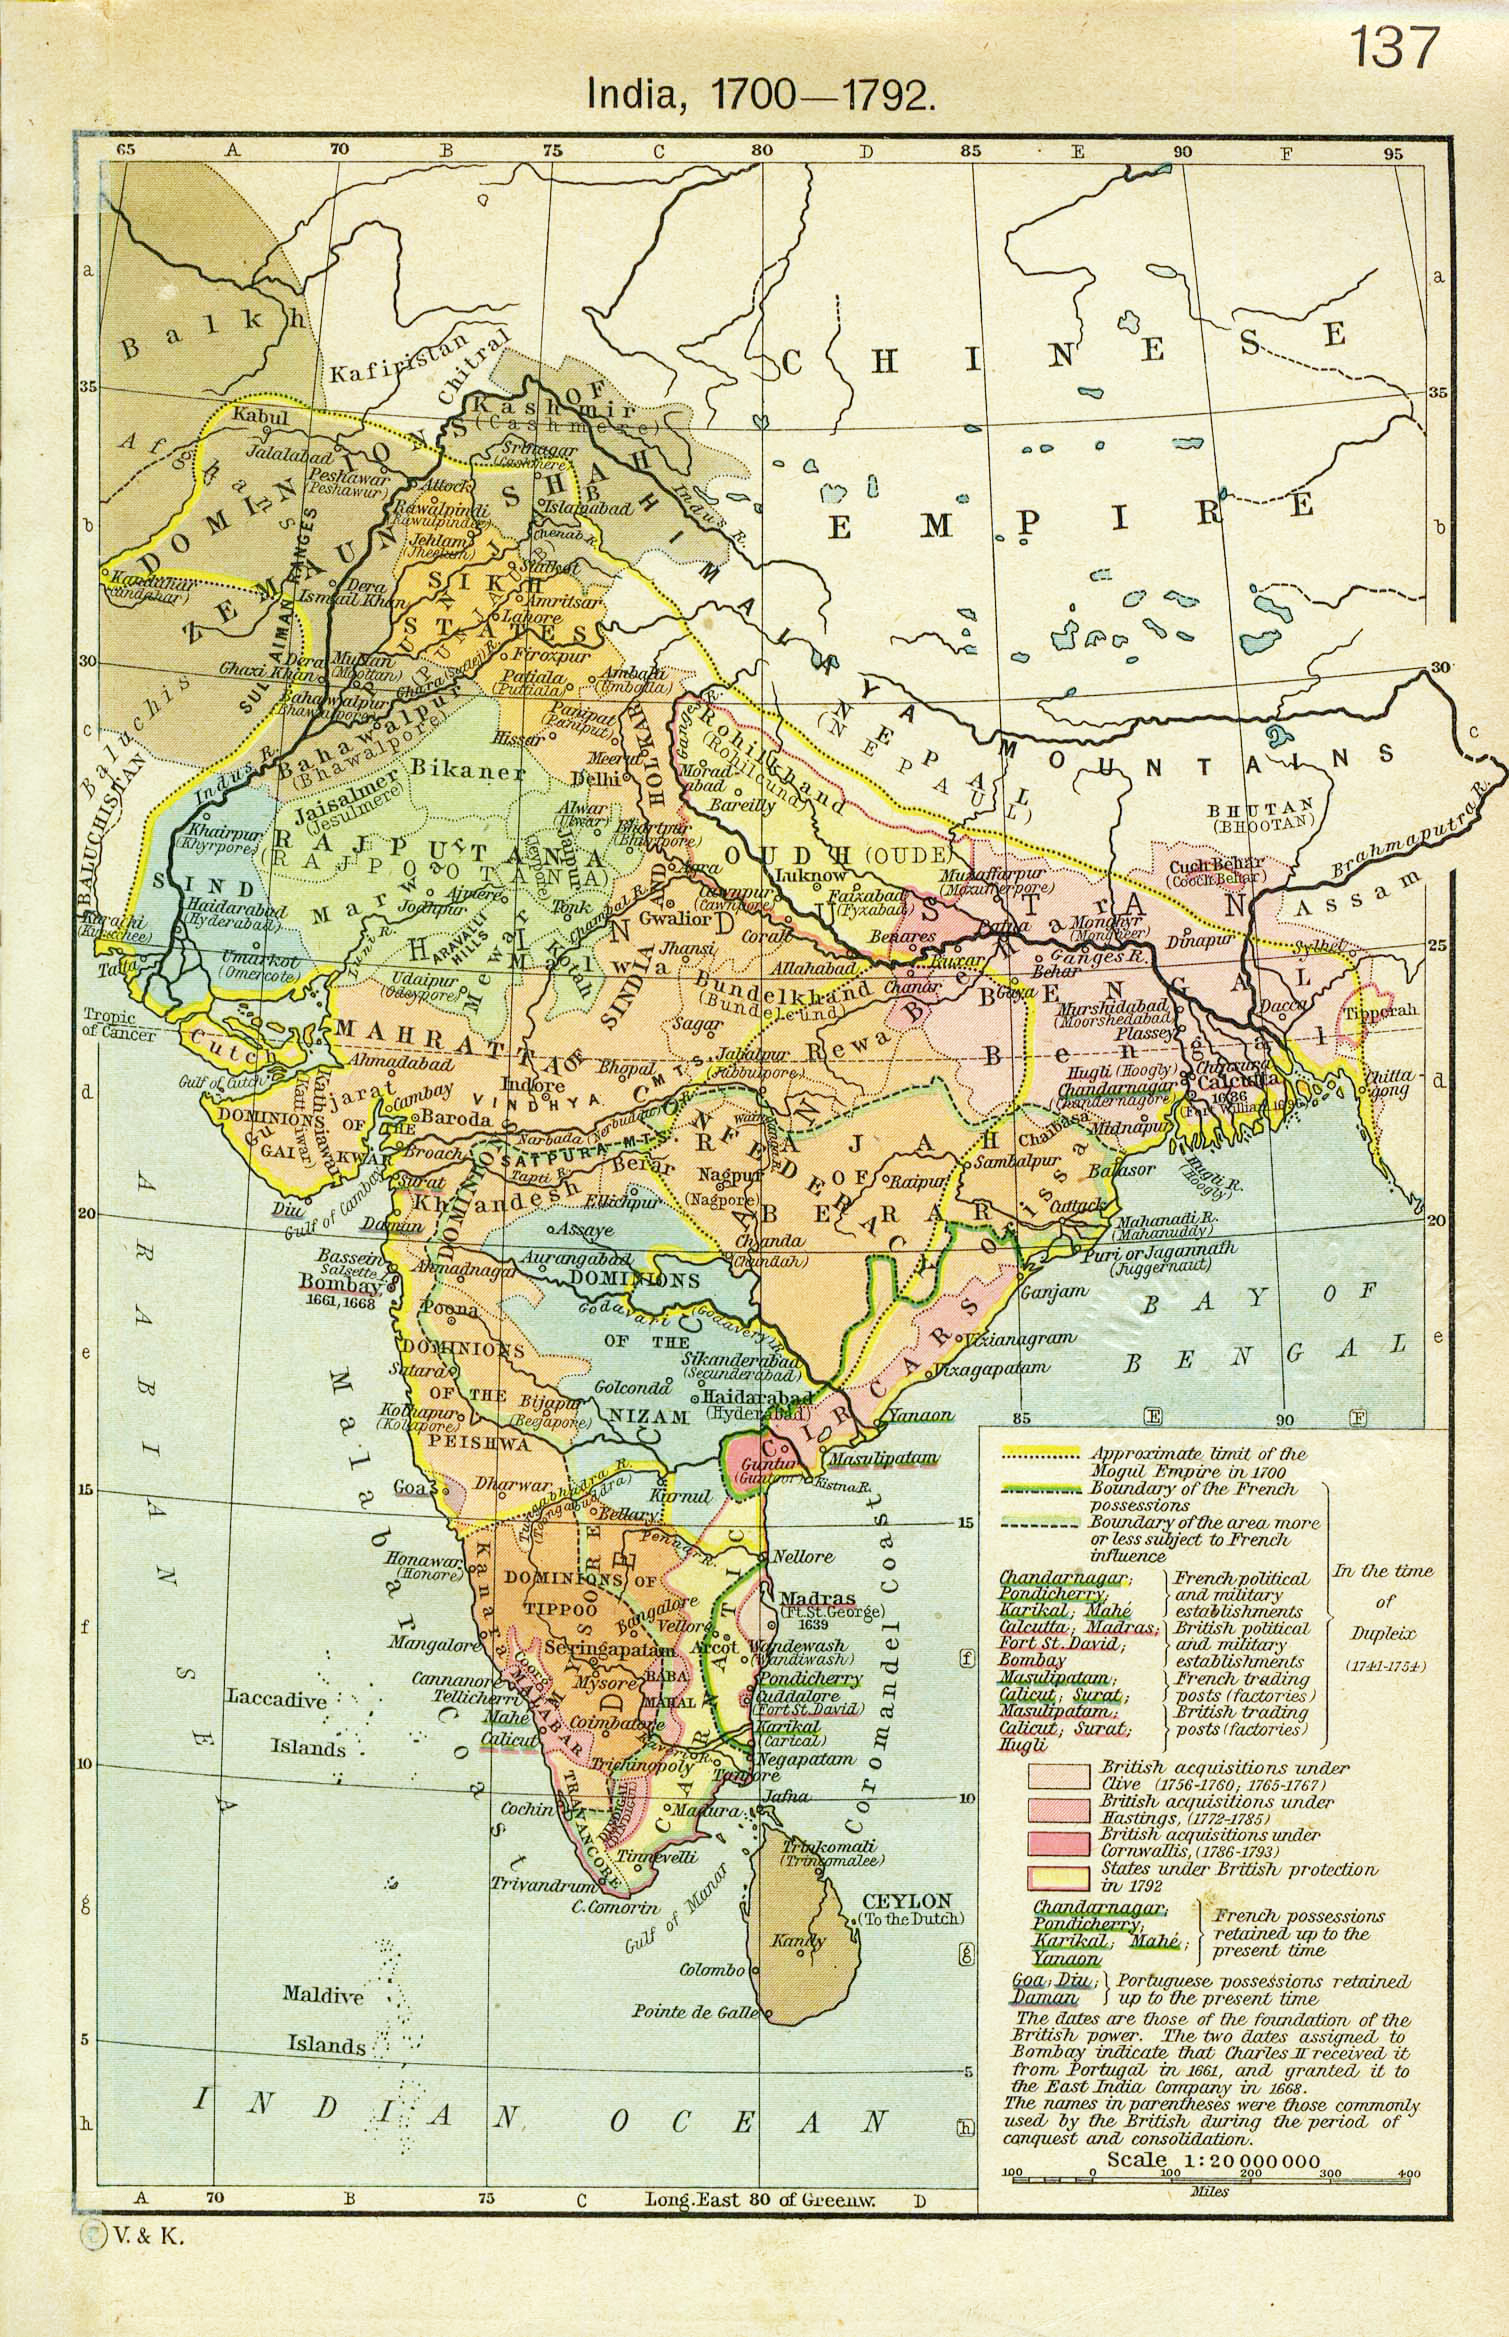 India (1700-1791) - The Historical Atlas by William R. Shepherd, 1923